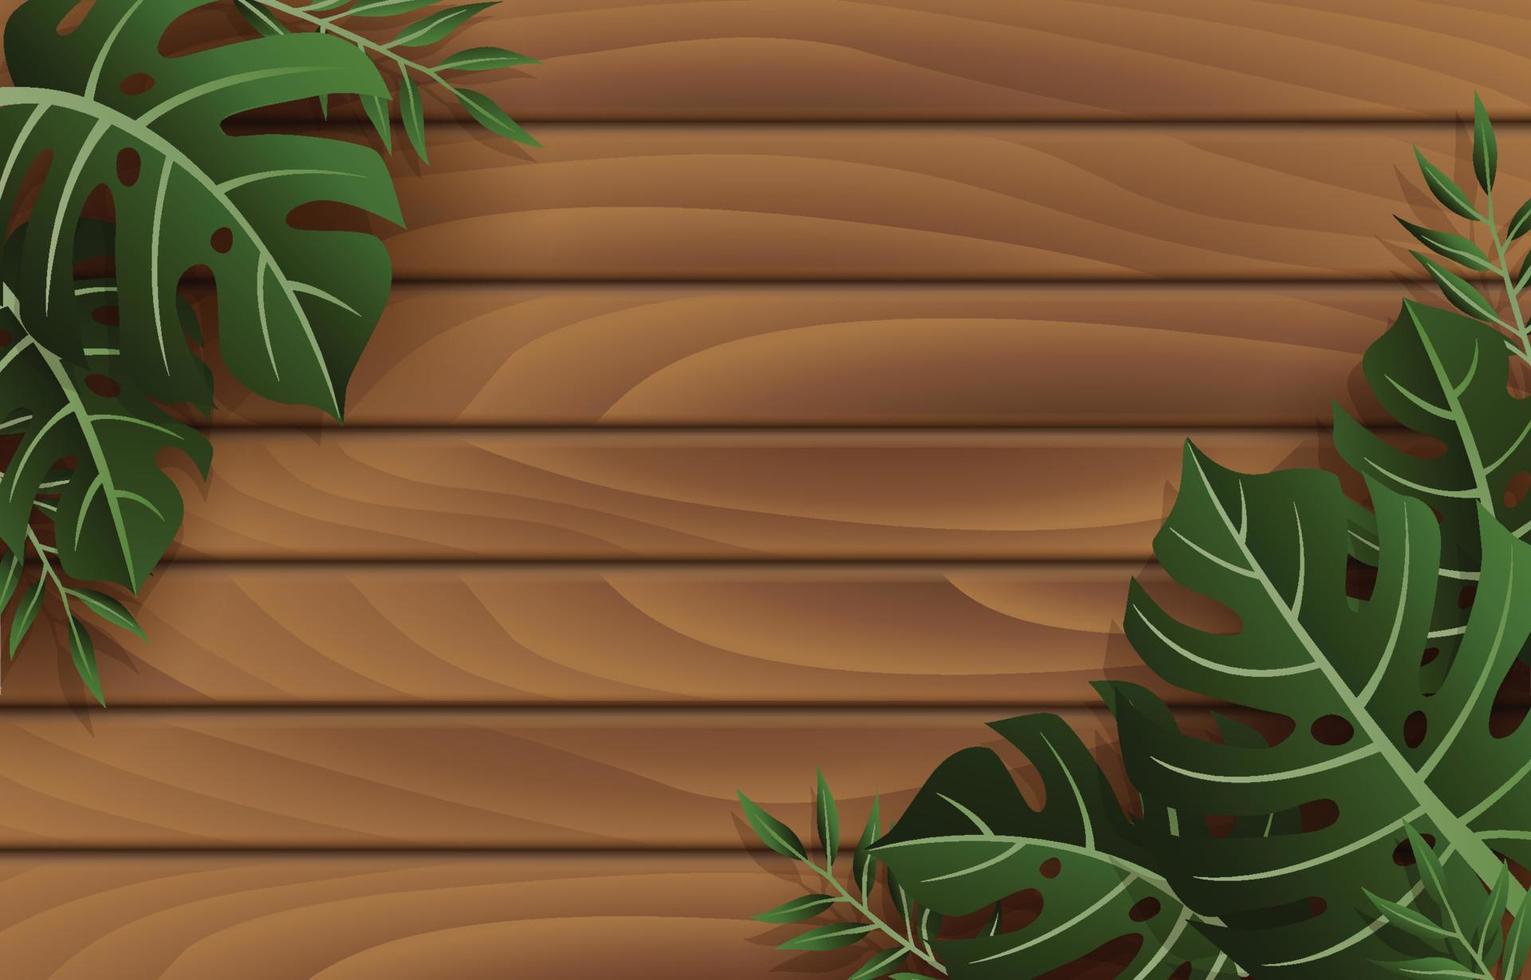 Wood and Foliage Background with Green Monstera Leaves vector